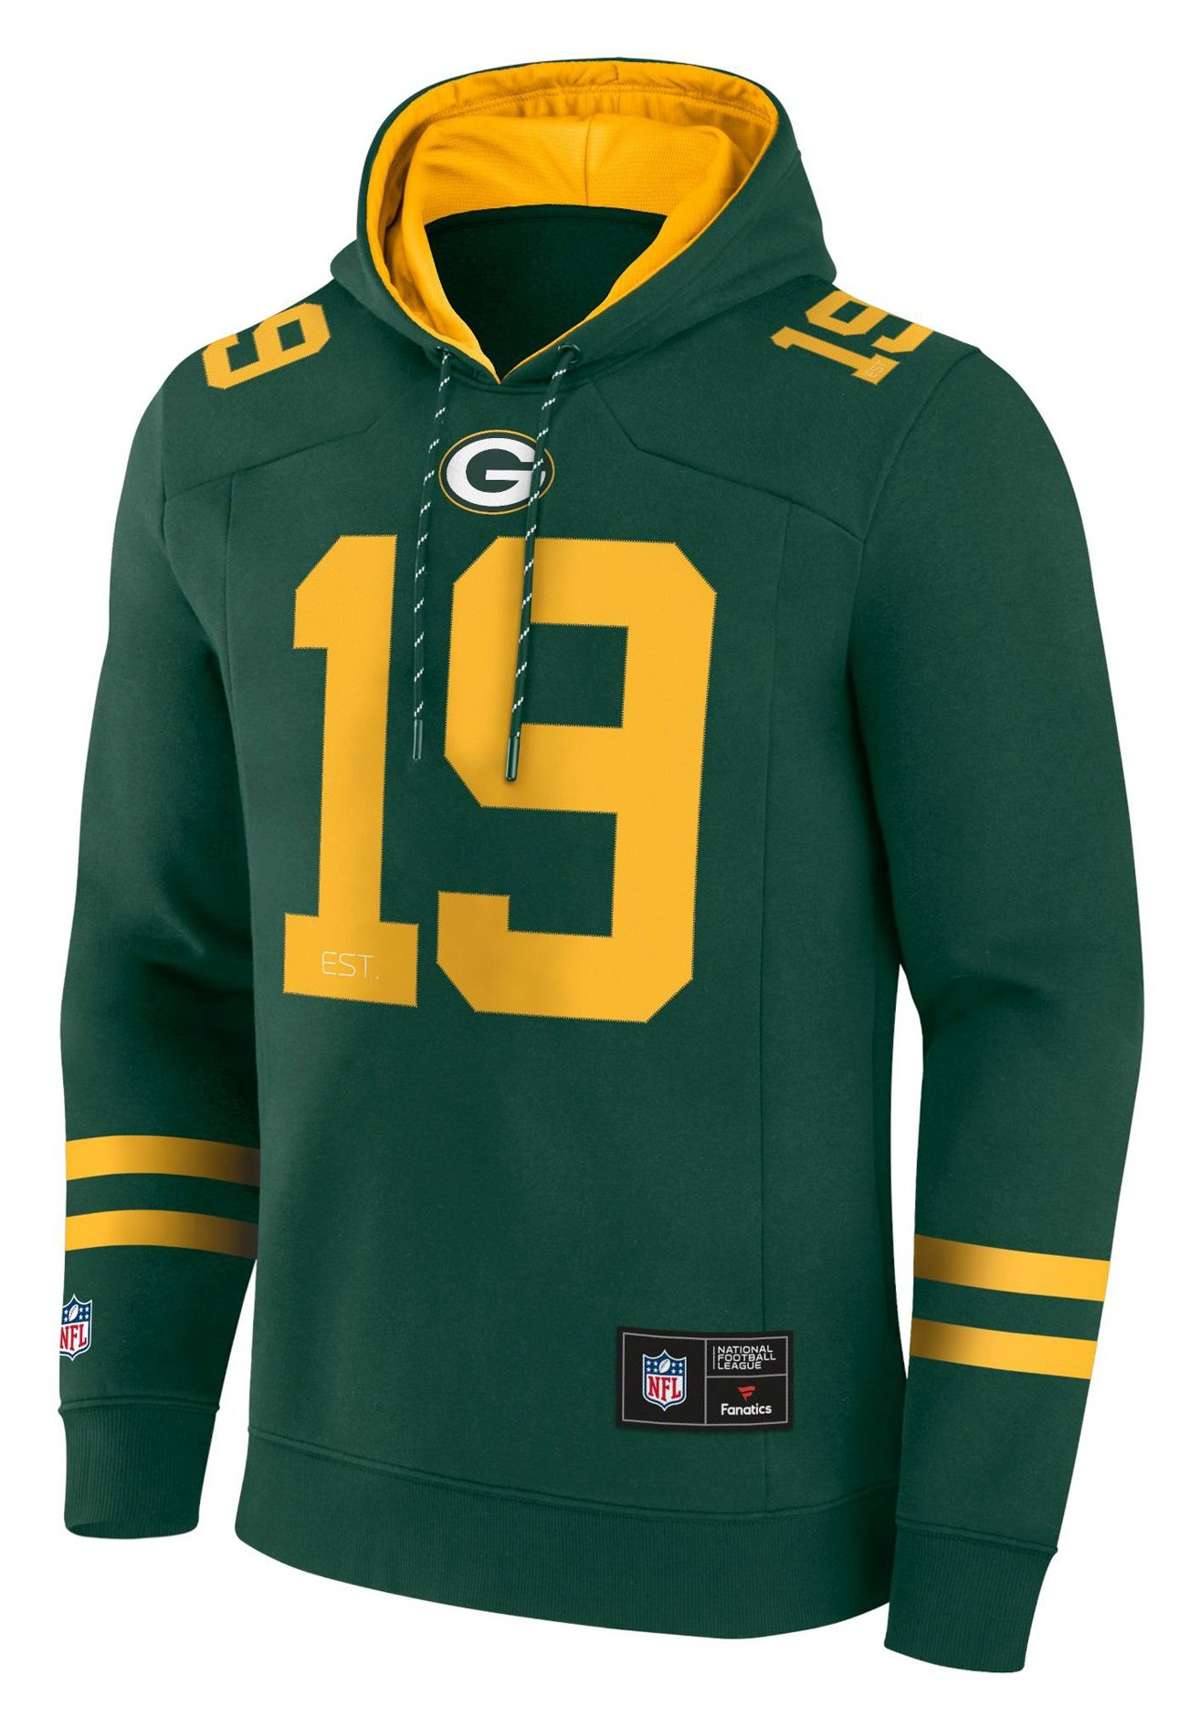 NFL BAY PACKERS FRANCHISE POH - Nationalmannschaft NFL BAY PACKERS FRANCHISE POH